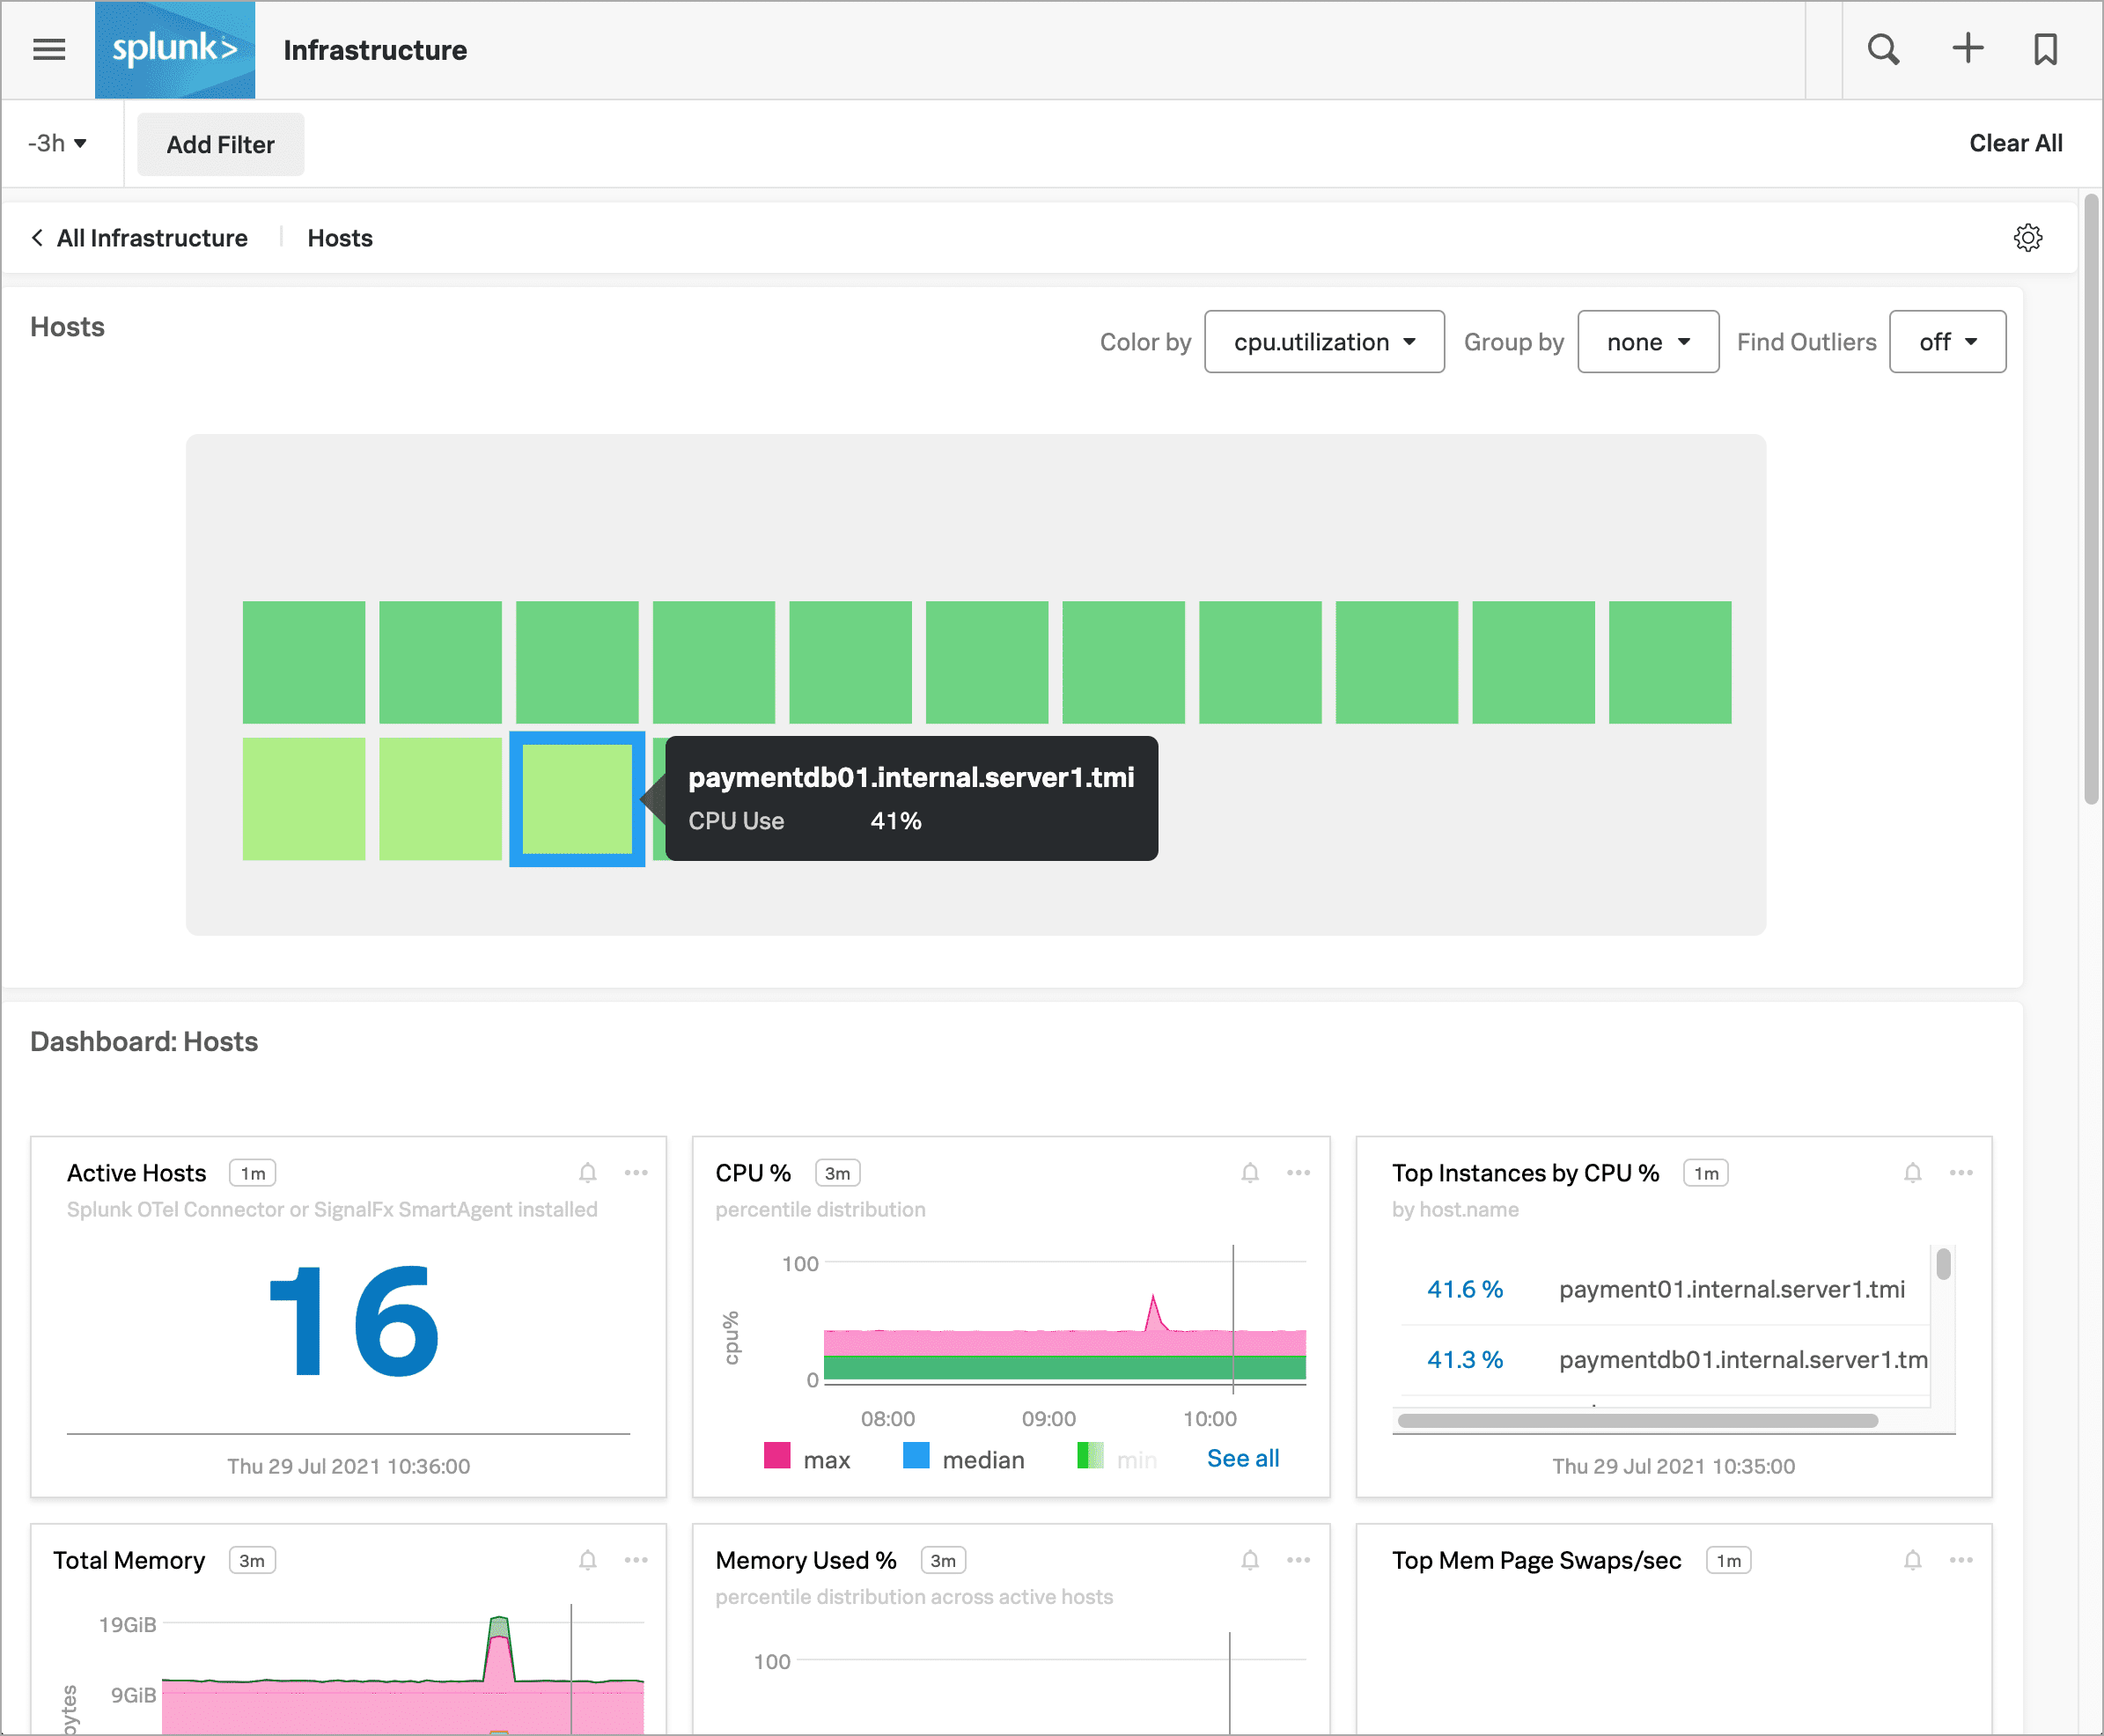 This screenshot shows the Hosts navigator in Splunk Infrastructure Monitoring displaying charts and visualizations of data collected from hosts.